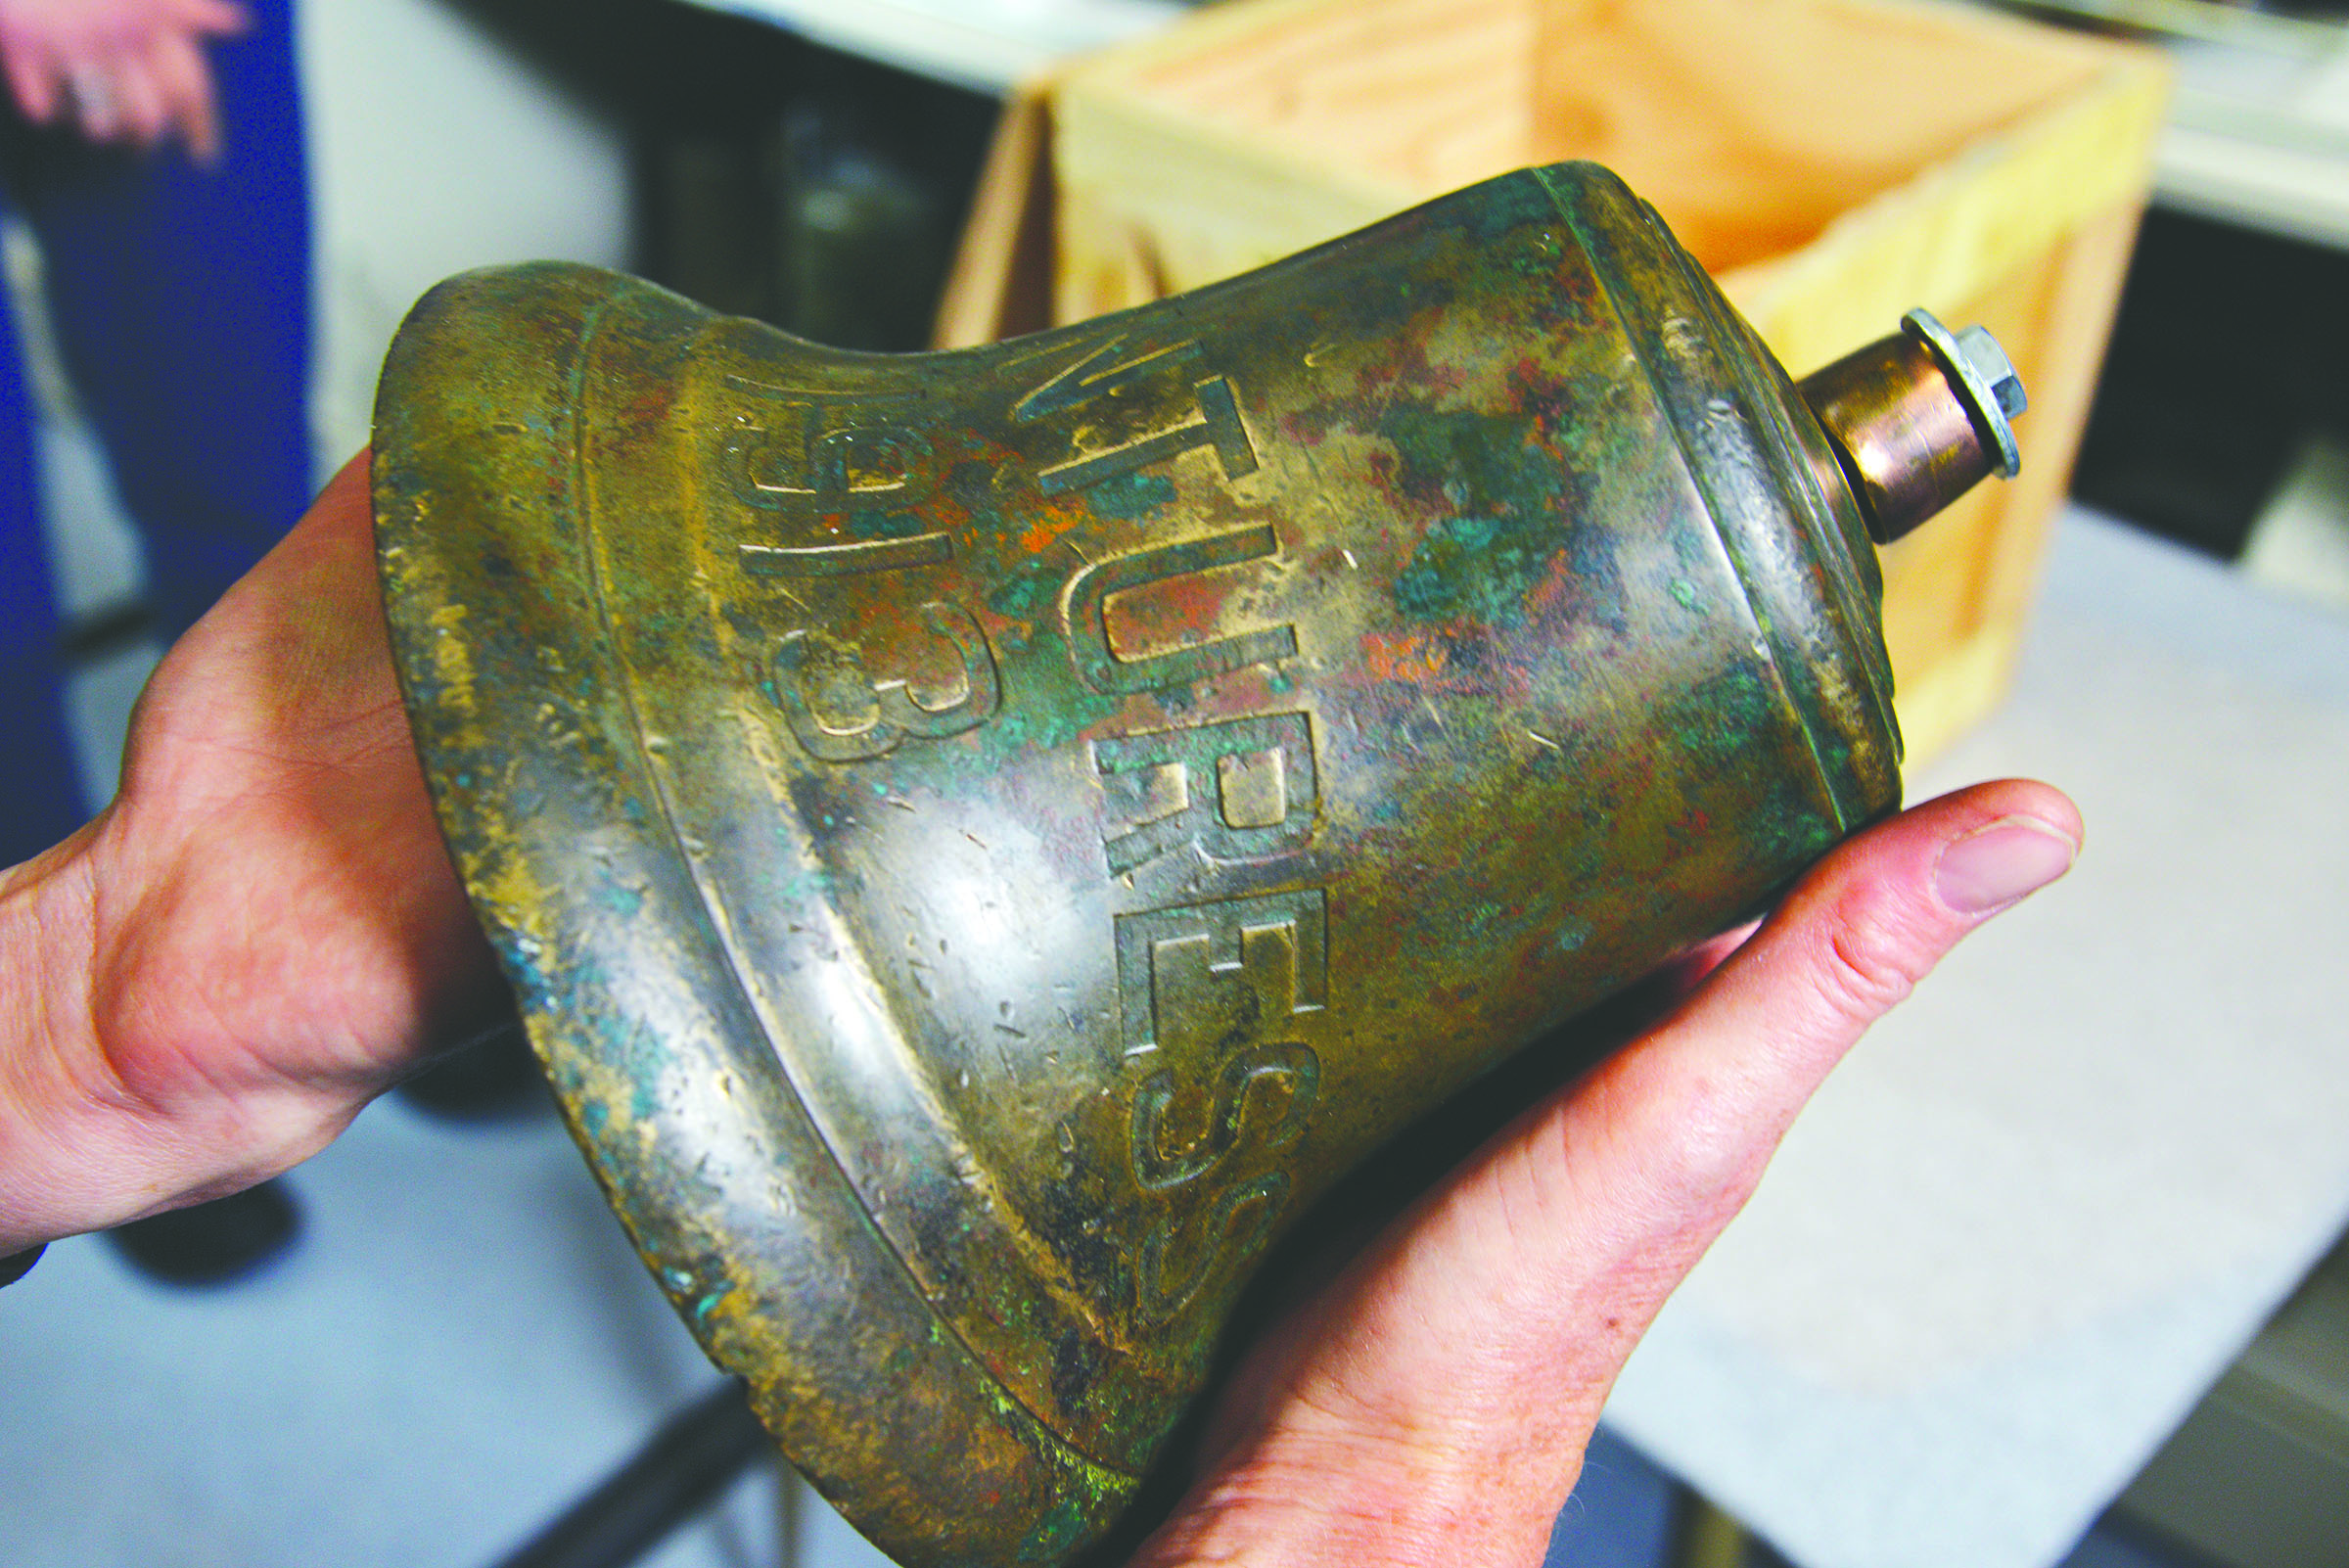 The original ship's bell of the schooner Adventuress is now back in Washington and will be displayed in Port Townsend on the boat in July. John Leben